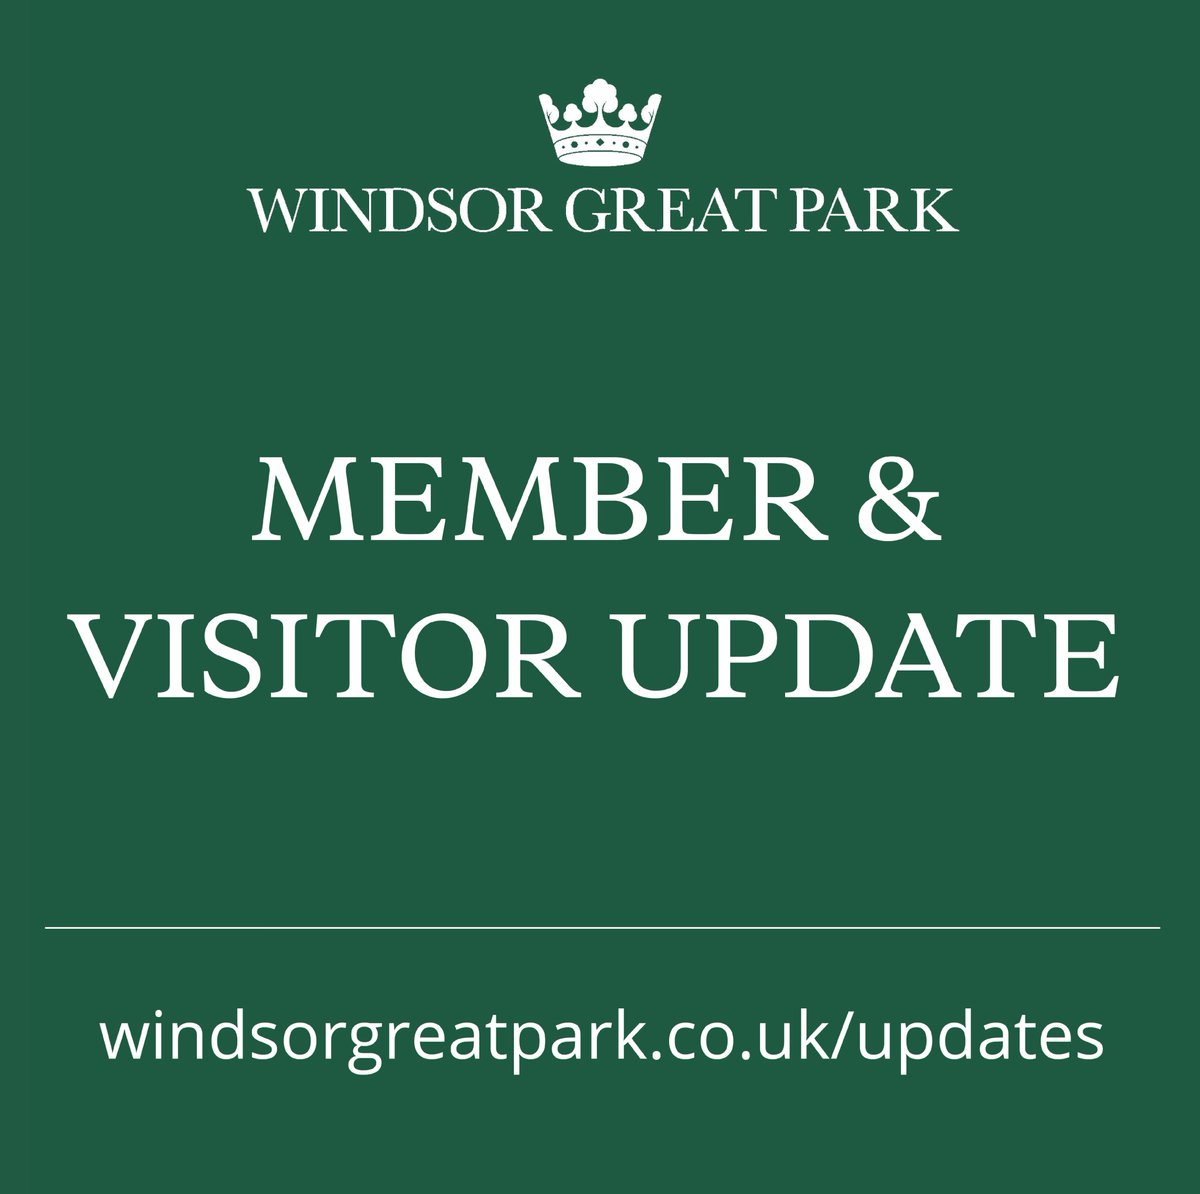 Strong winds have been forecast for Tuesday 9 April. In response to this and following our severe weather procedures, please be aware of closures that will be in place from the morning of Tuesday 9 April that may impact your visit. windsorgreatpark.co.uk/visitorupdates @visitwindsor